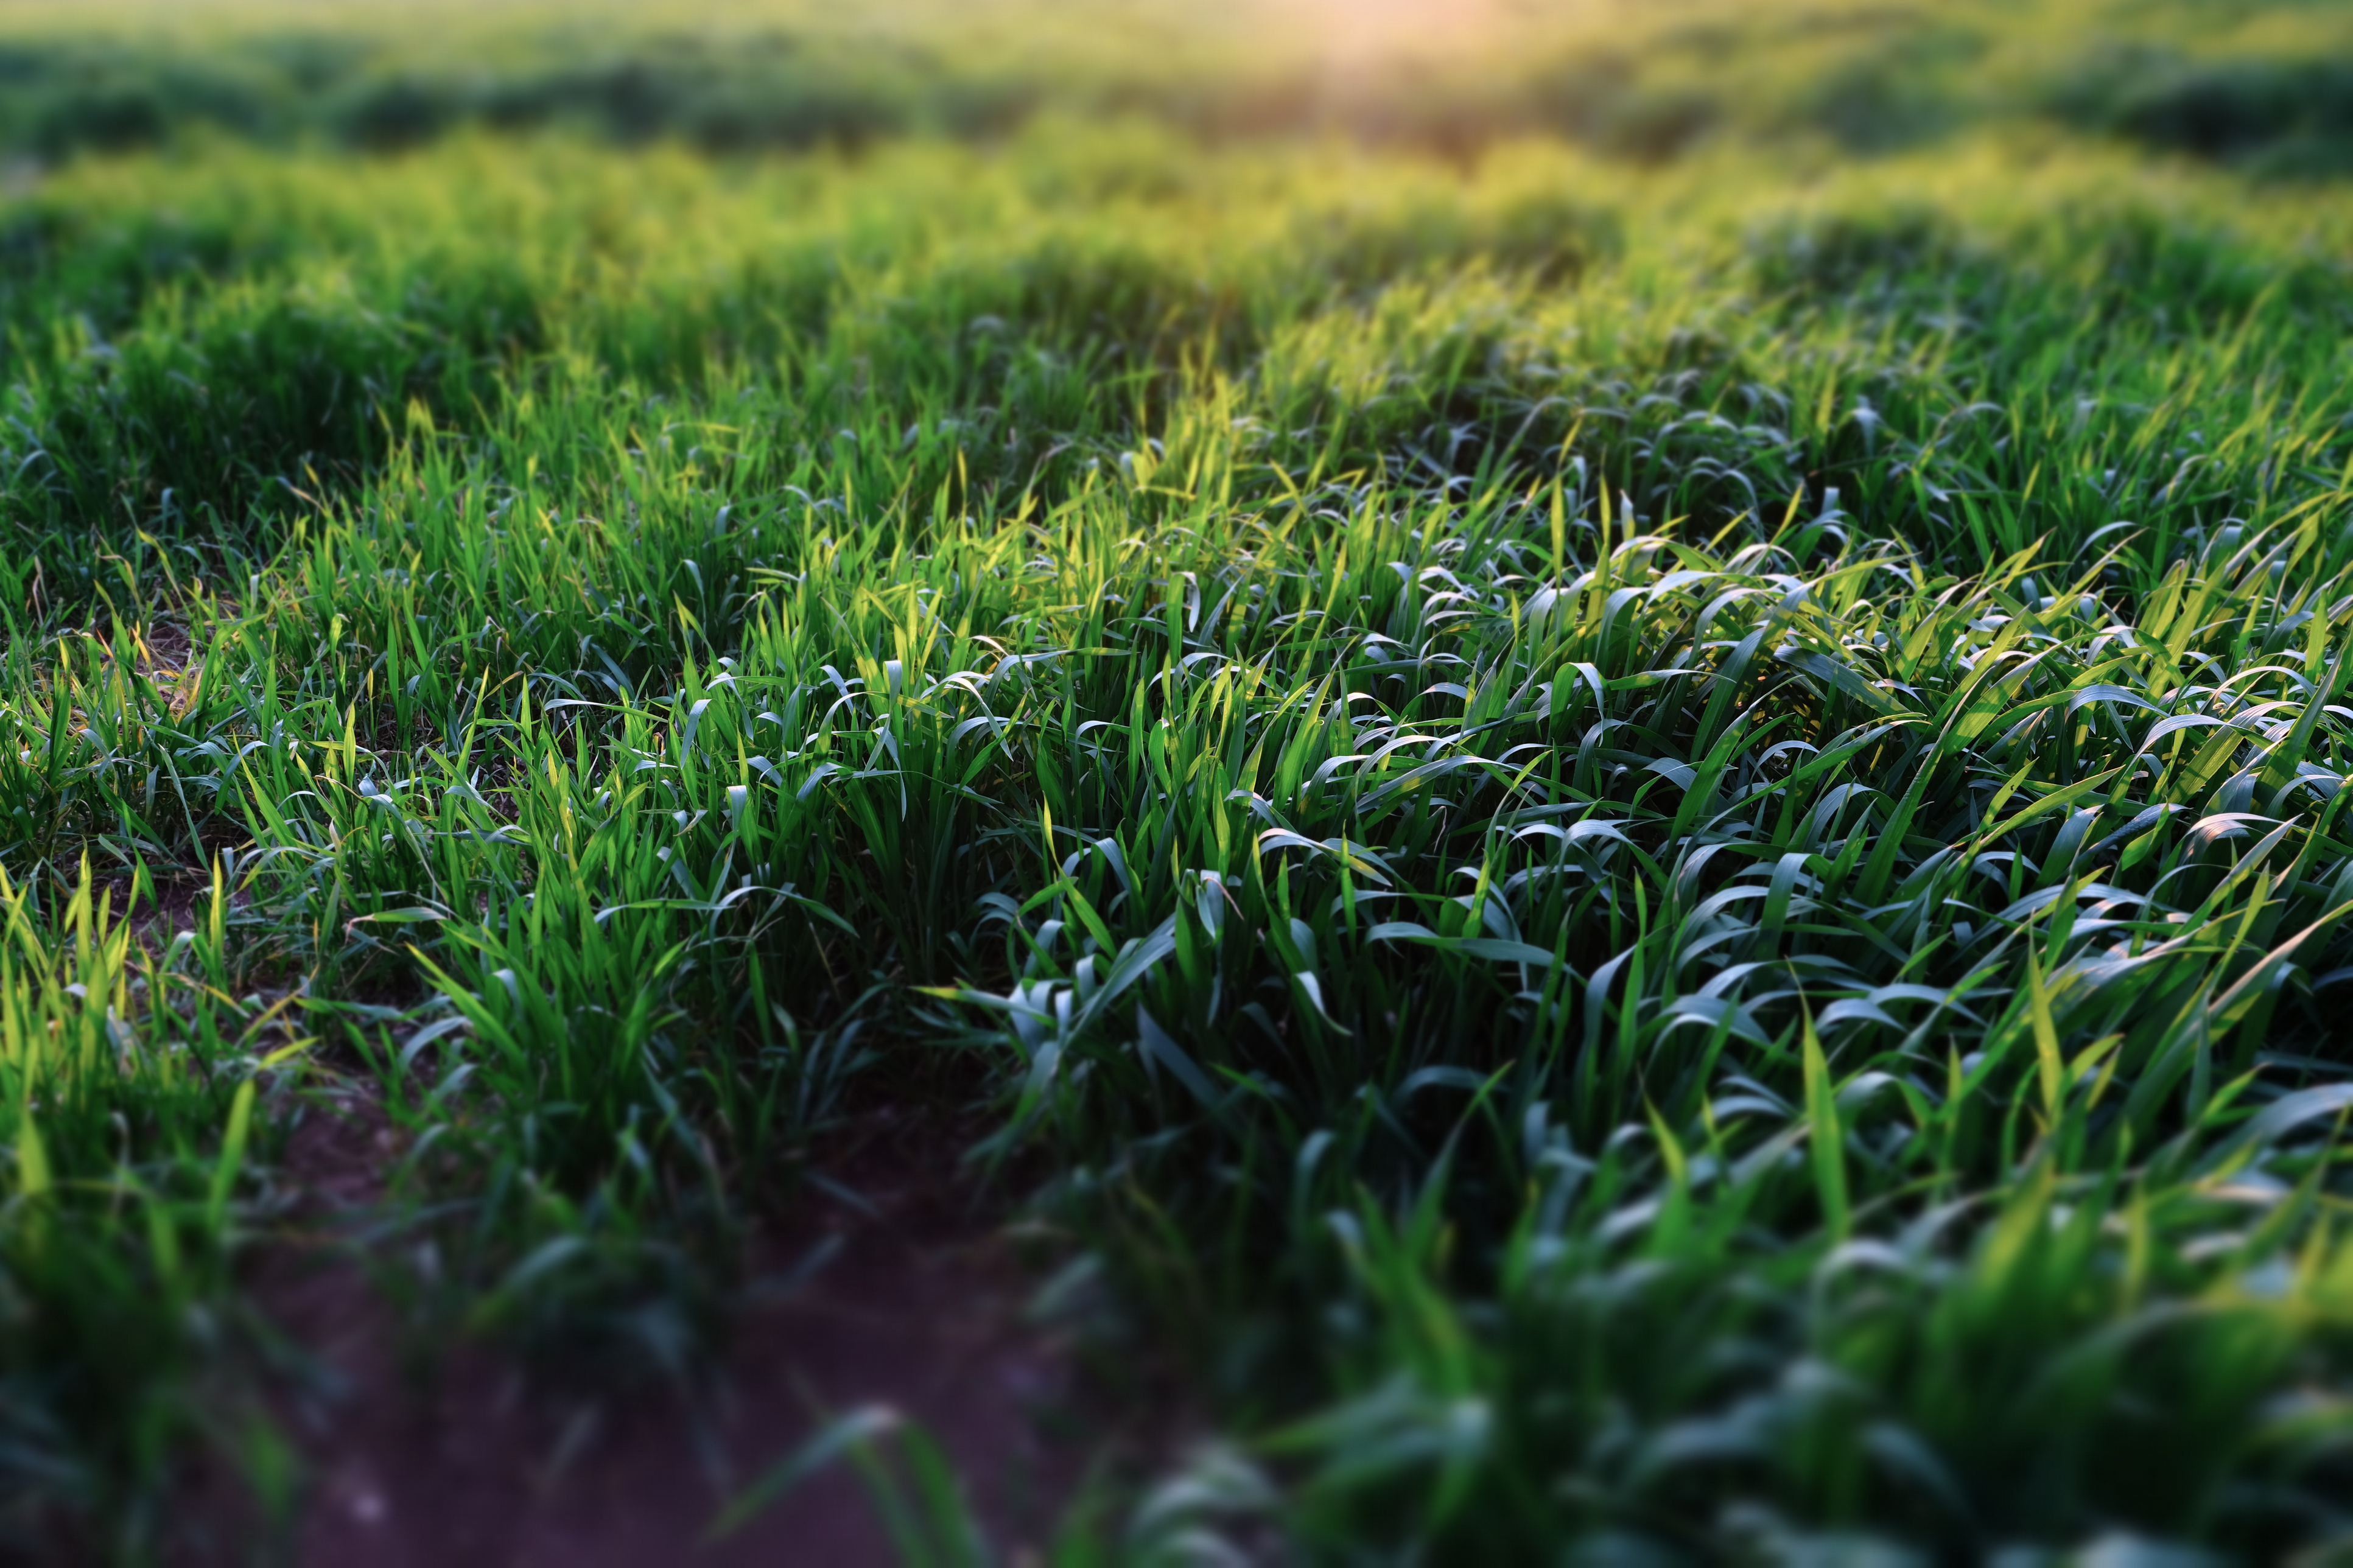 Grass needs air and water to thrive (Thinkstock/PA)